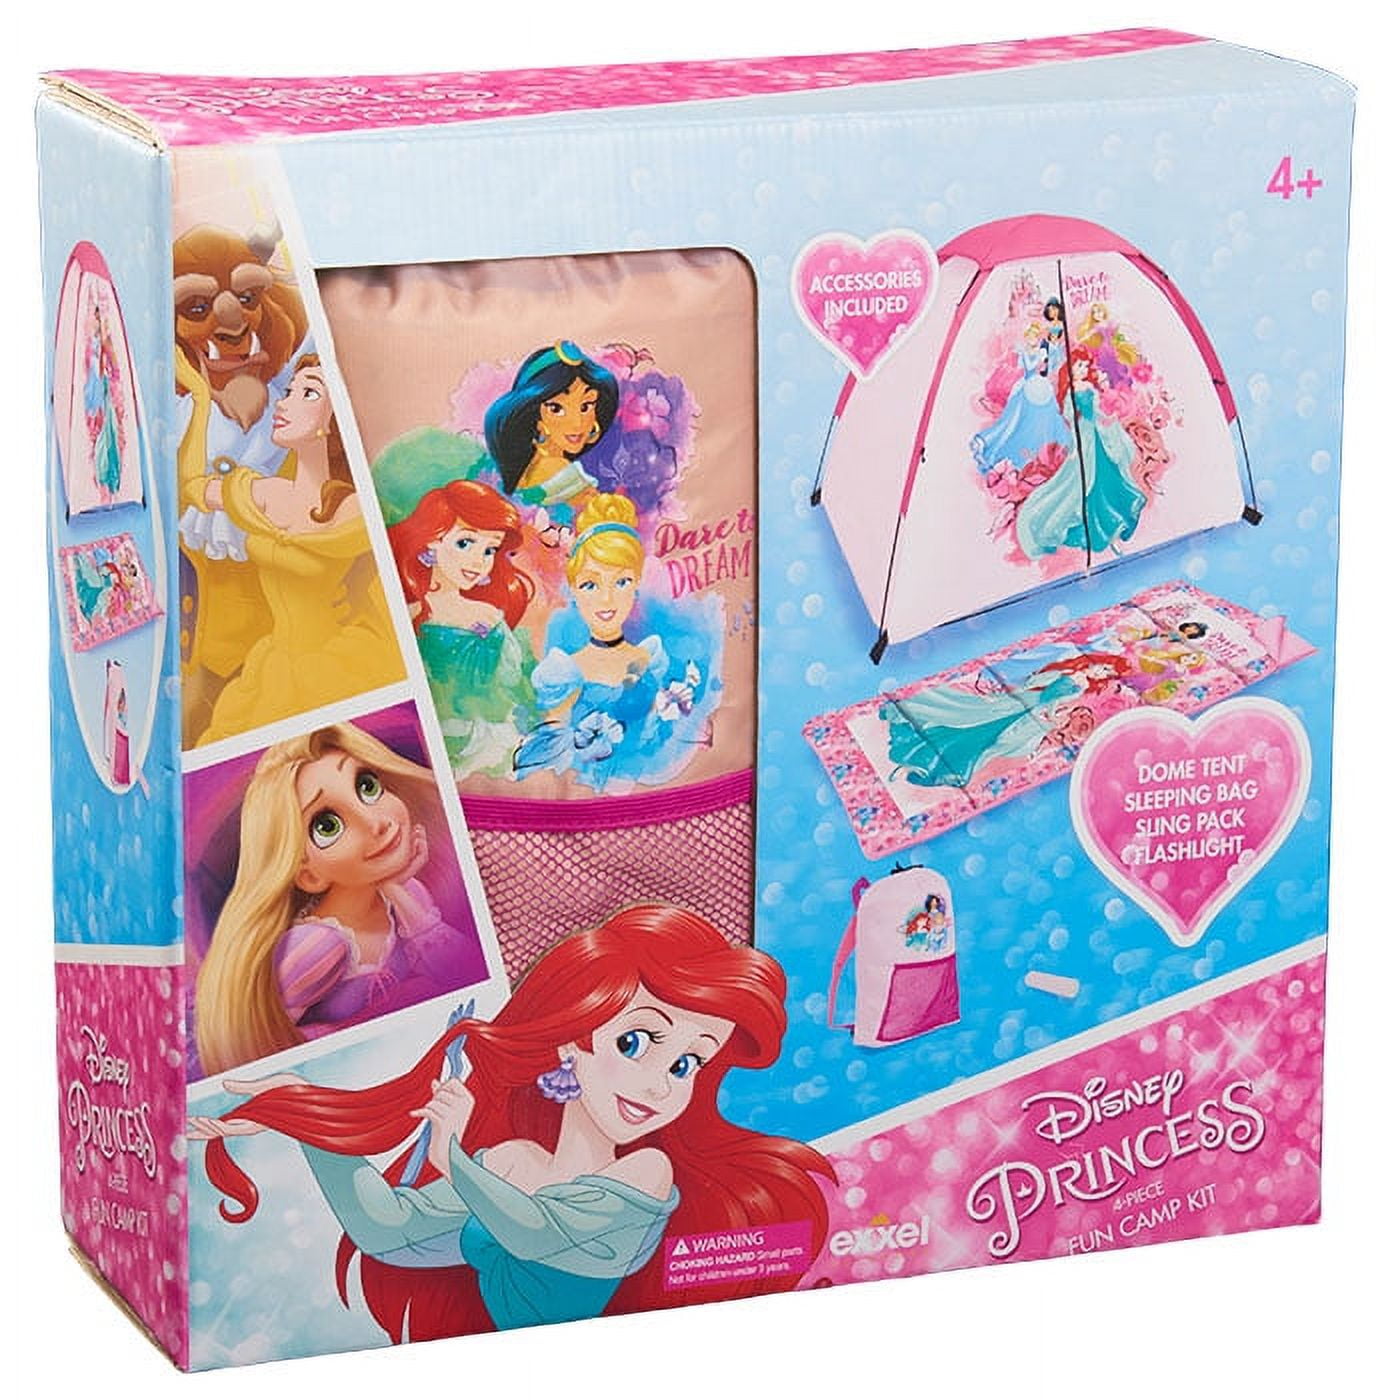 4-Piece Disney Princess Kid's Indoor/ Outdoor Camping Sling Kit (Dome Tent, Sleeping Bag, Sling Backpack and LED Flashlight) $14.54  + Free S&H w/ Walmart+ or $35+